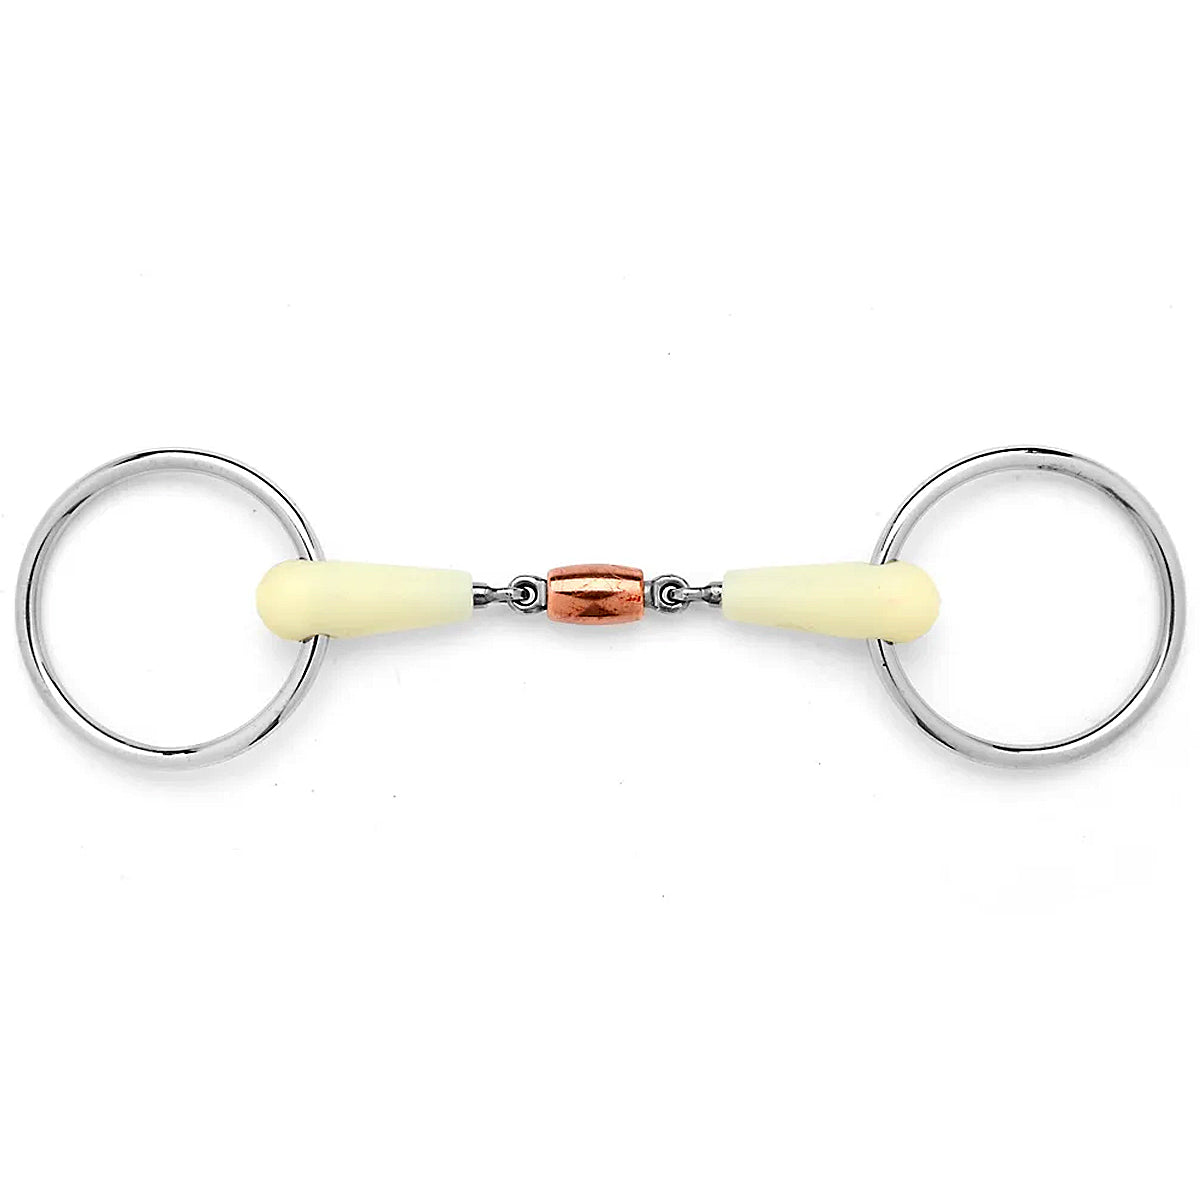 Happy Mouth Copper Roller Mouth Loose Ring